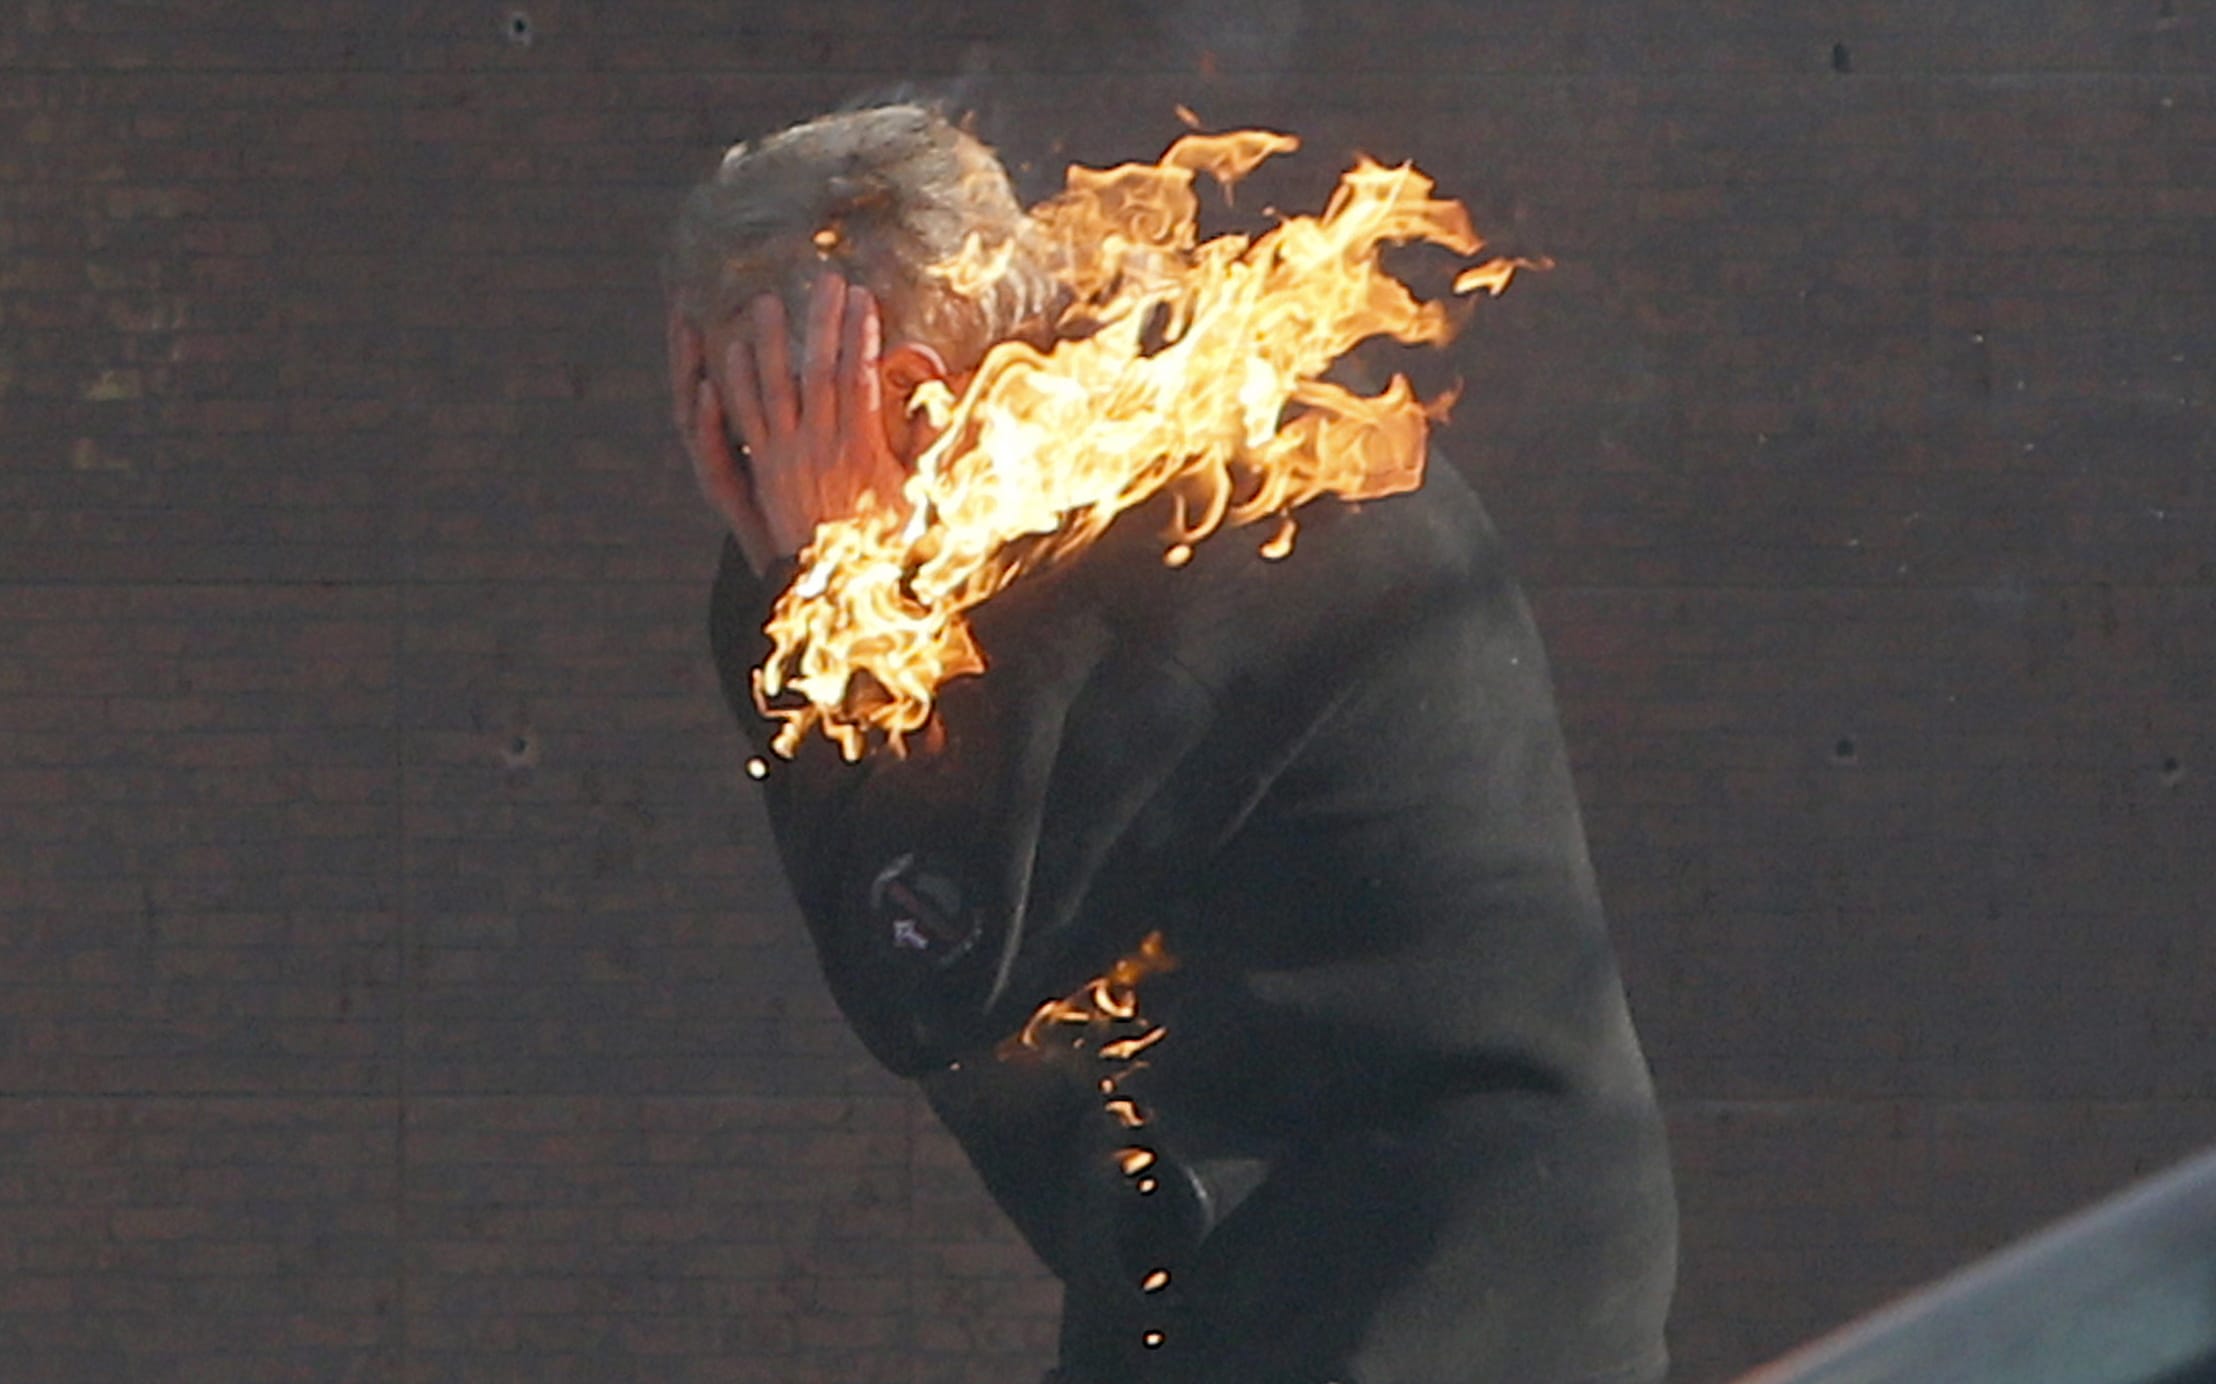 An anti-government protester burns during clashes with riot police Tuesday outside Ukraine's parliament in Kiev.